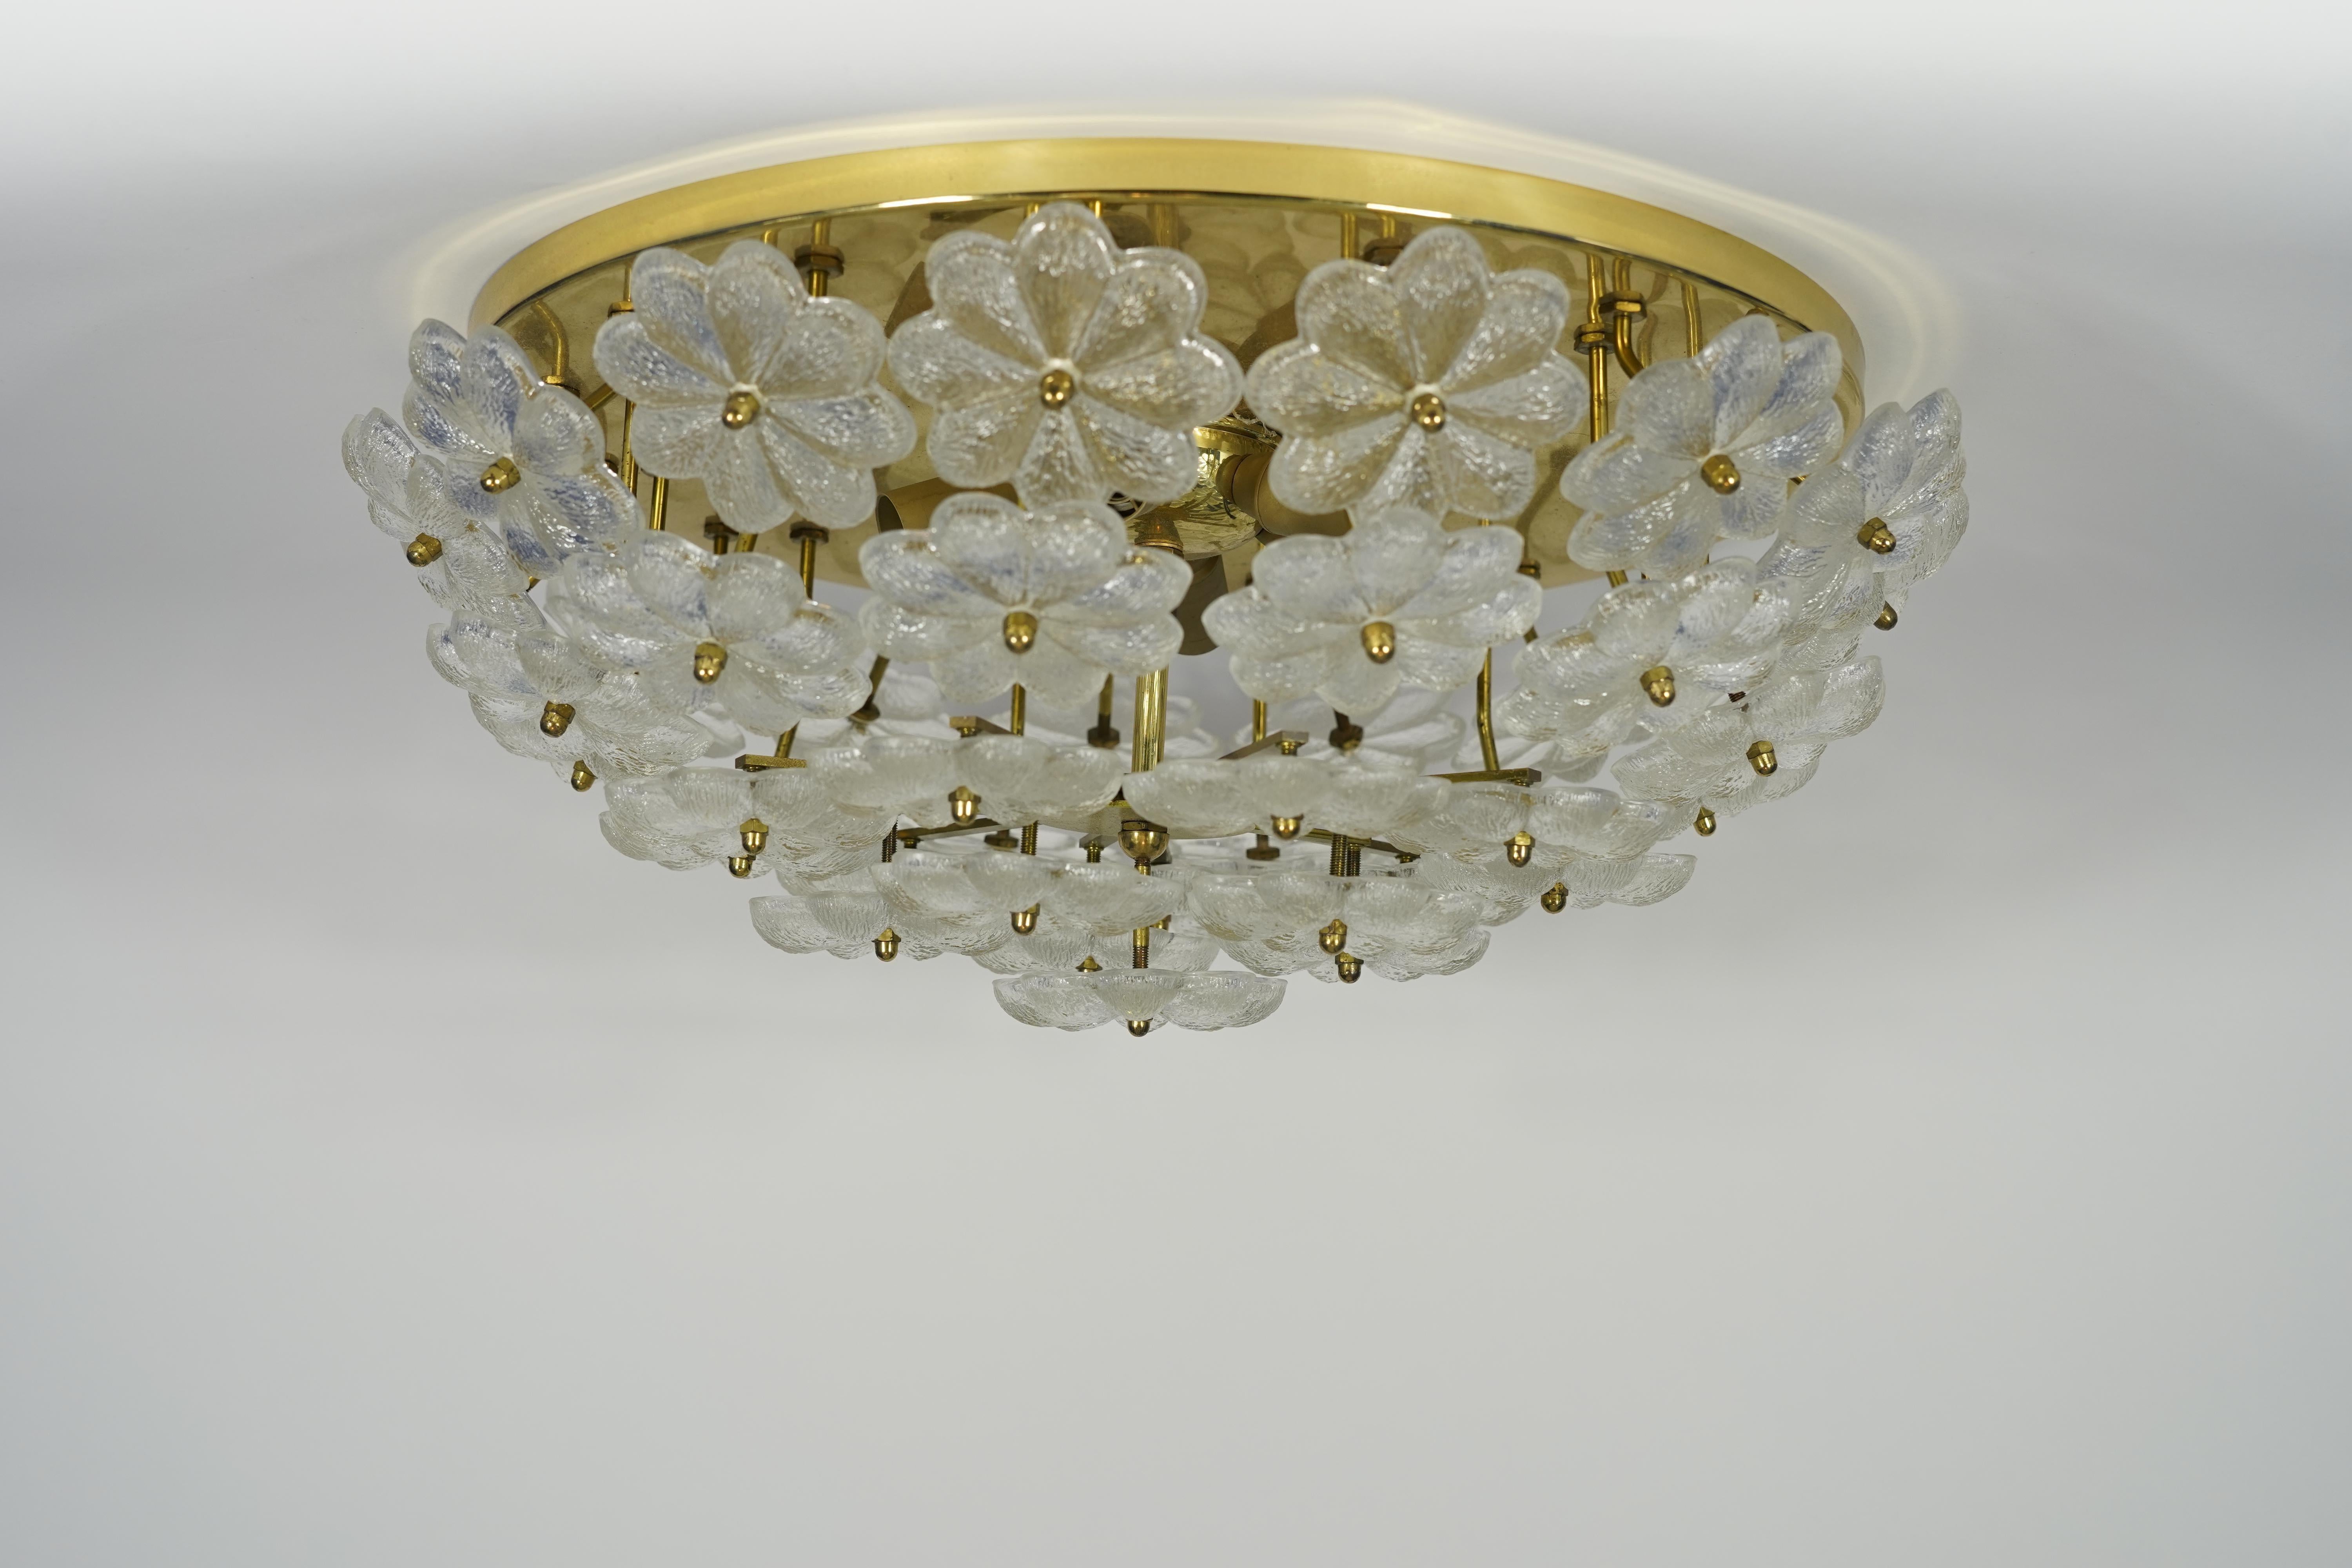 Polished brass base with 6 candelabra sockets, numerous individual large clear glass in the shape of a flower forms a shade.